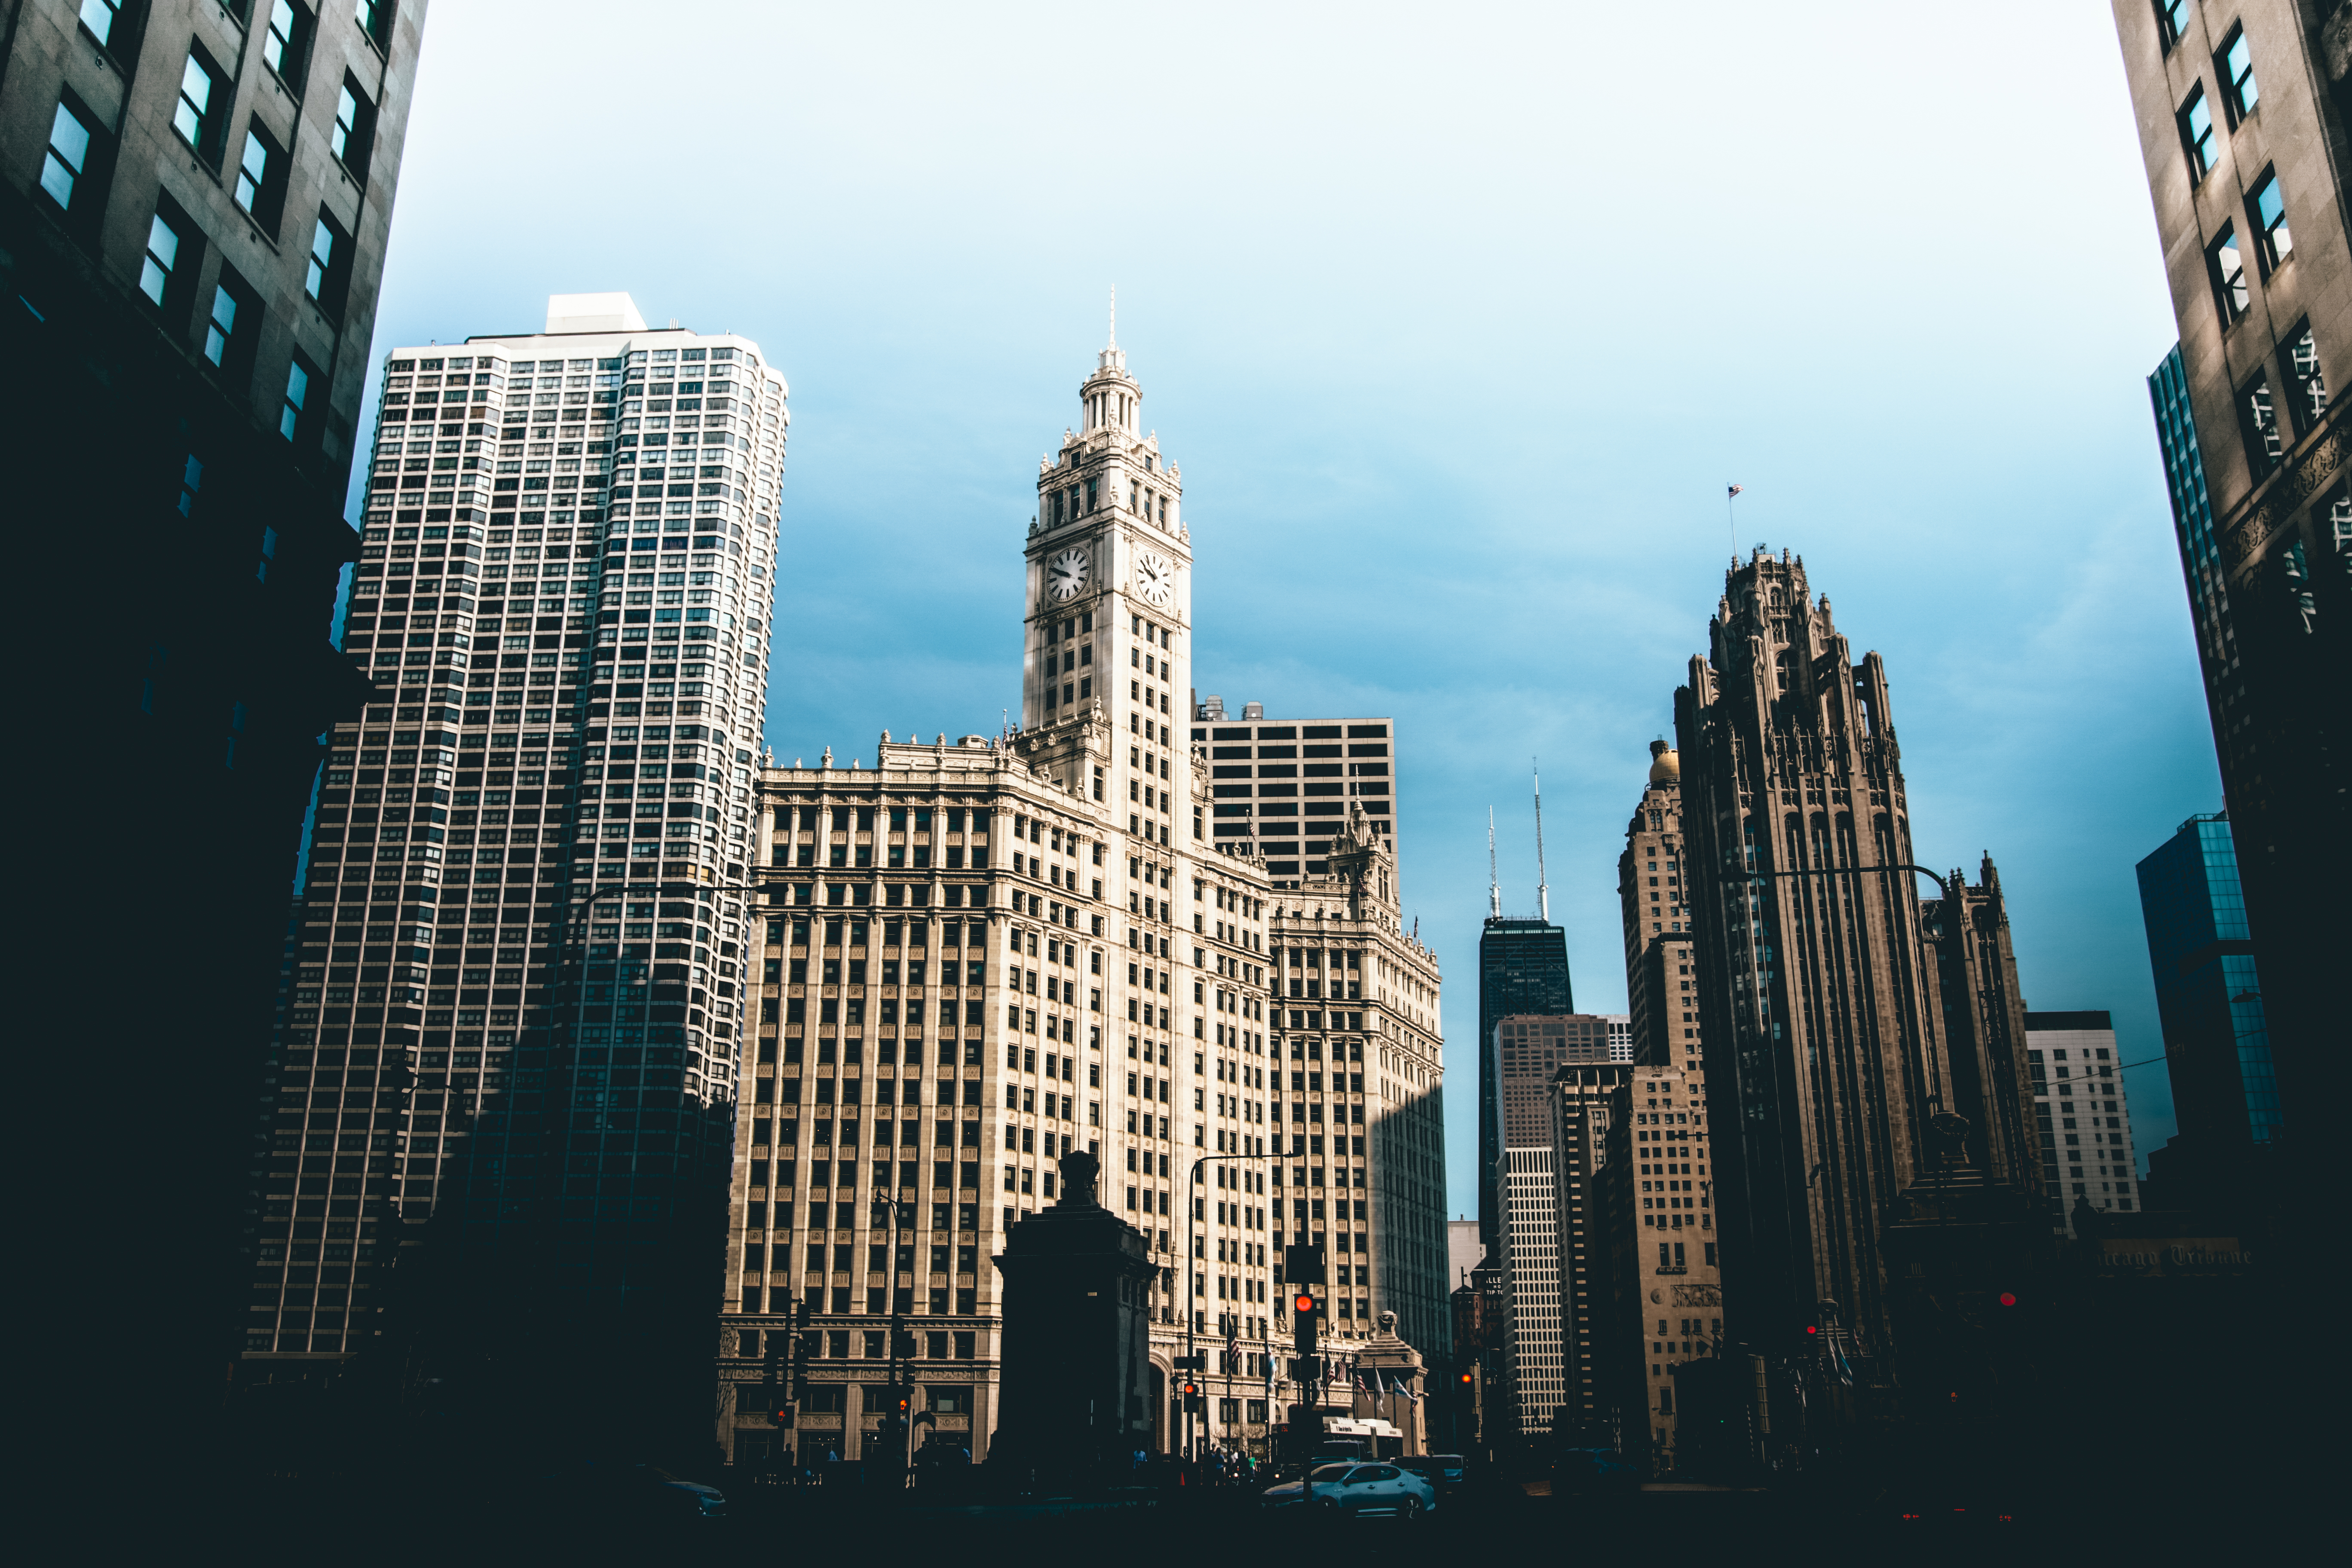 united states, chicago, cities, architecture, usa, building, skyscrapers